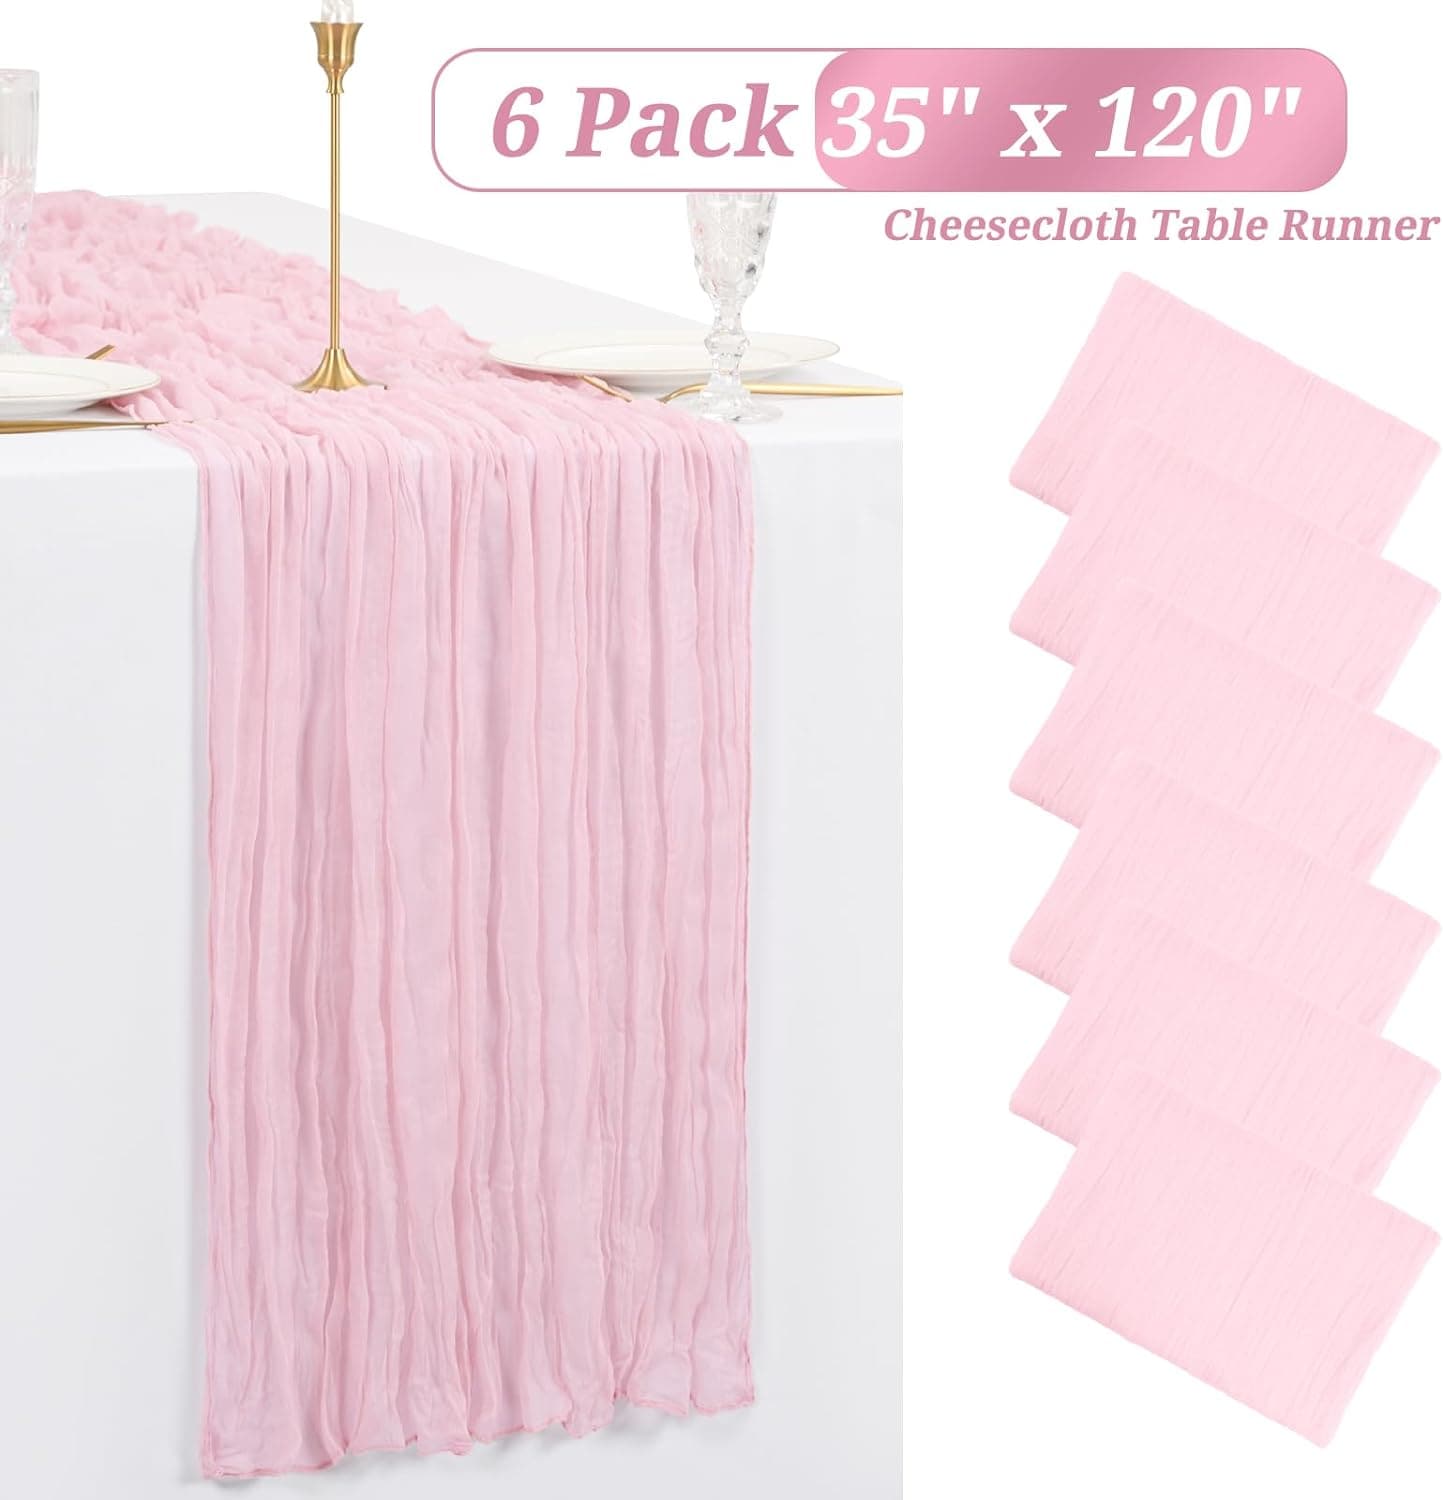 6 Pack Cheesecloth Table Runner 10FT